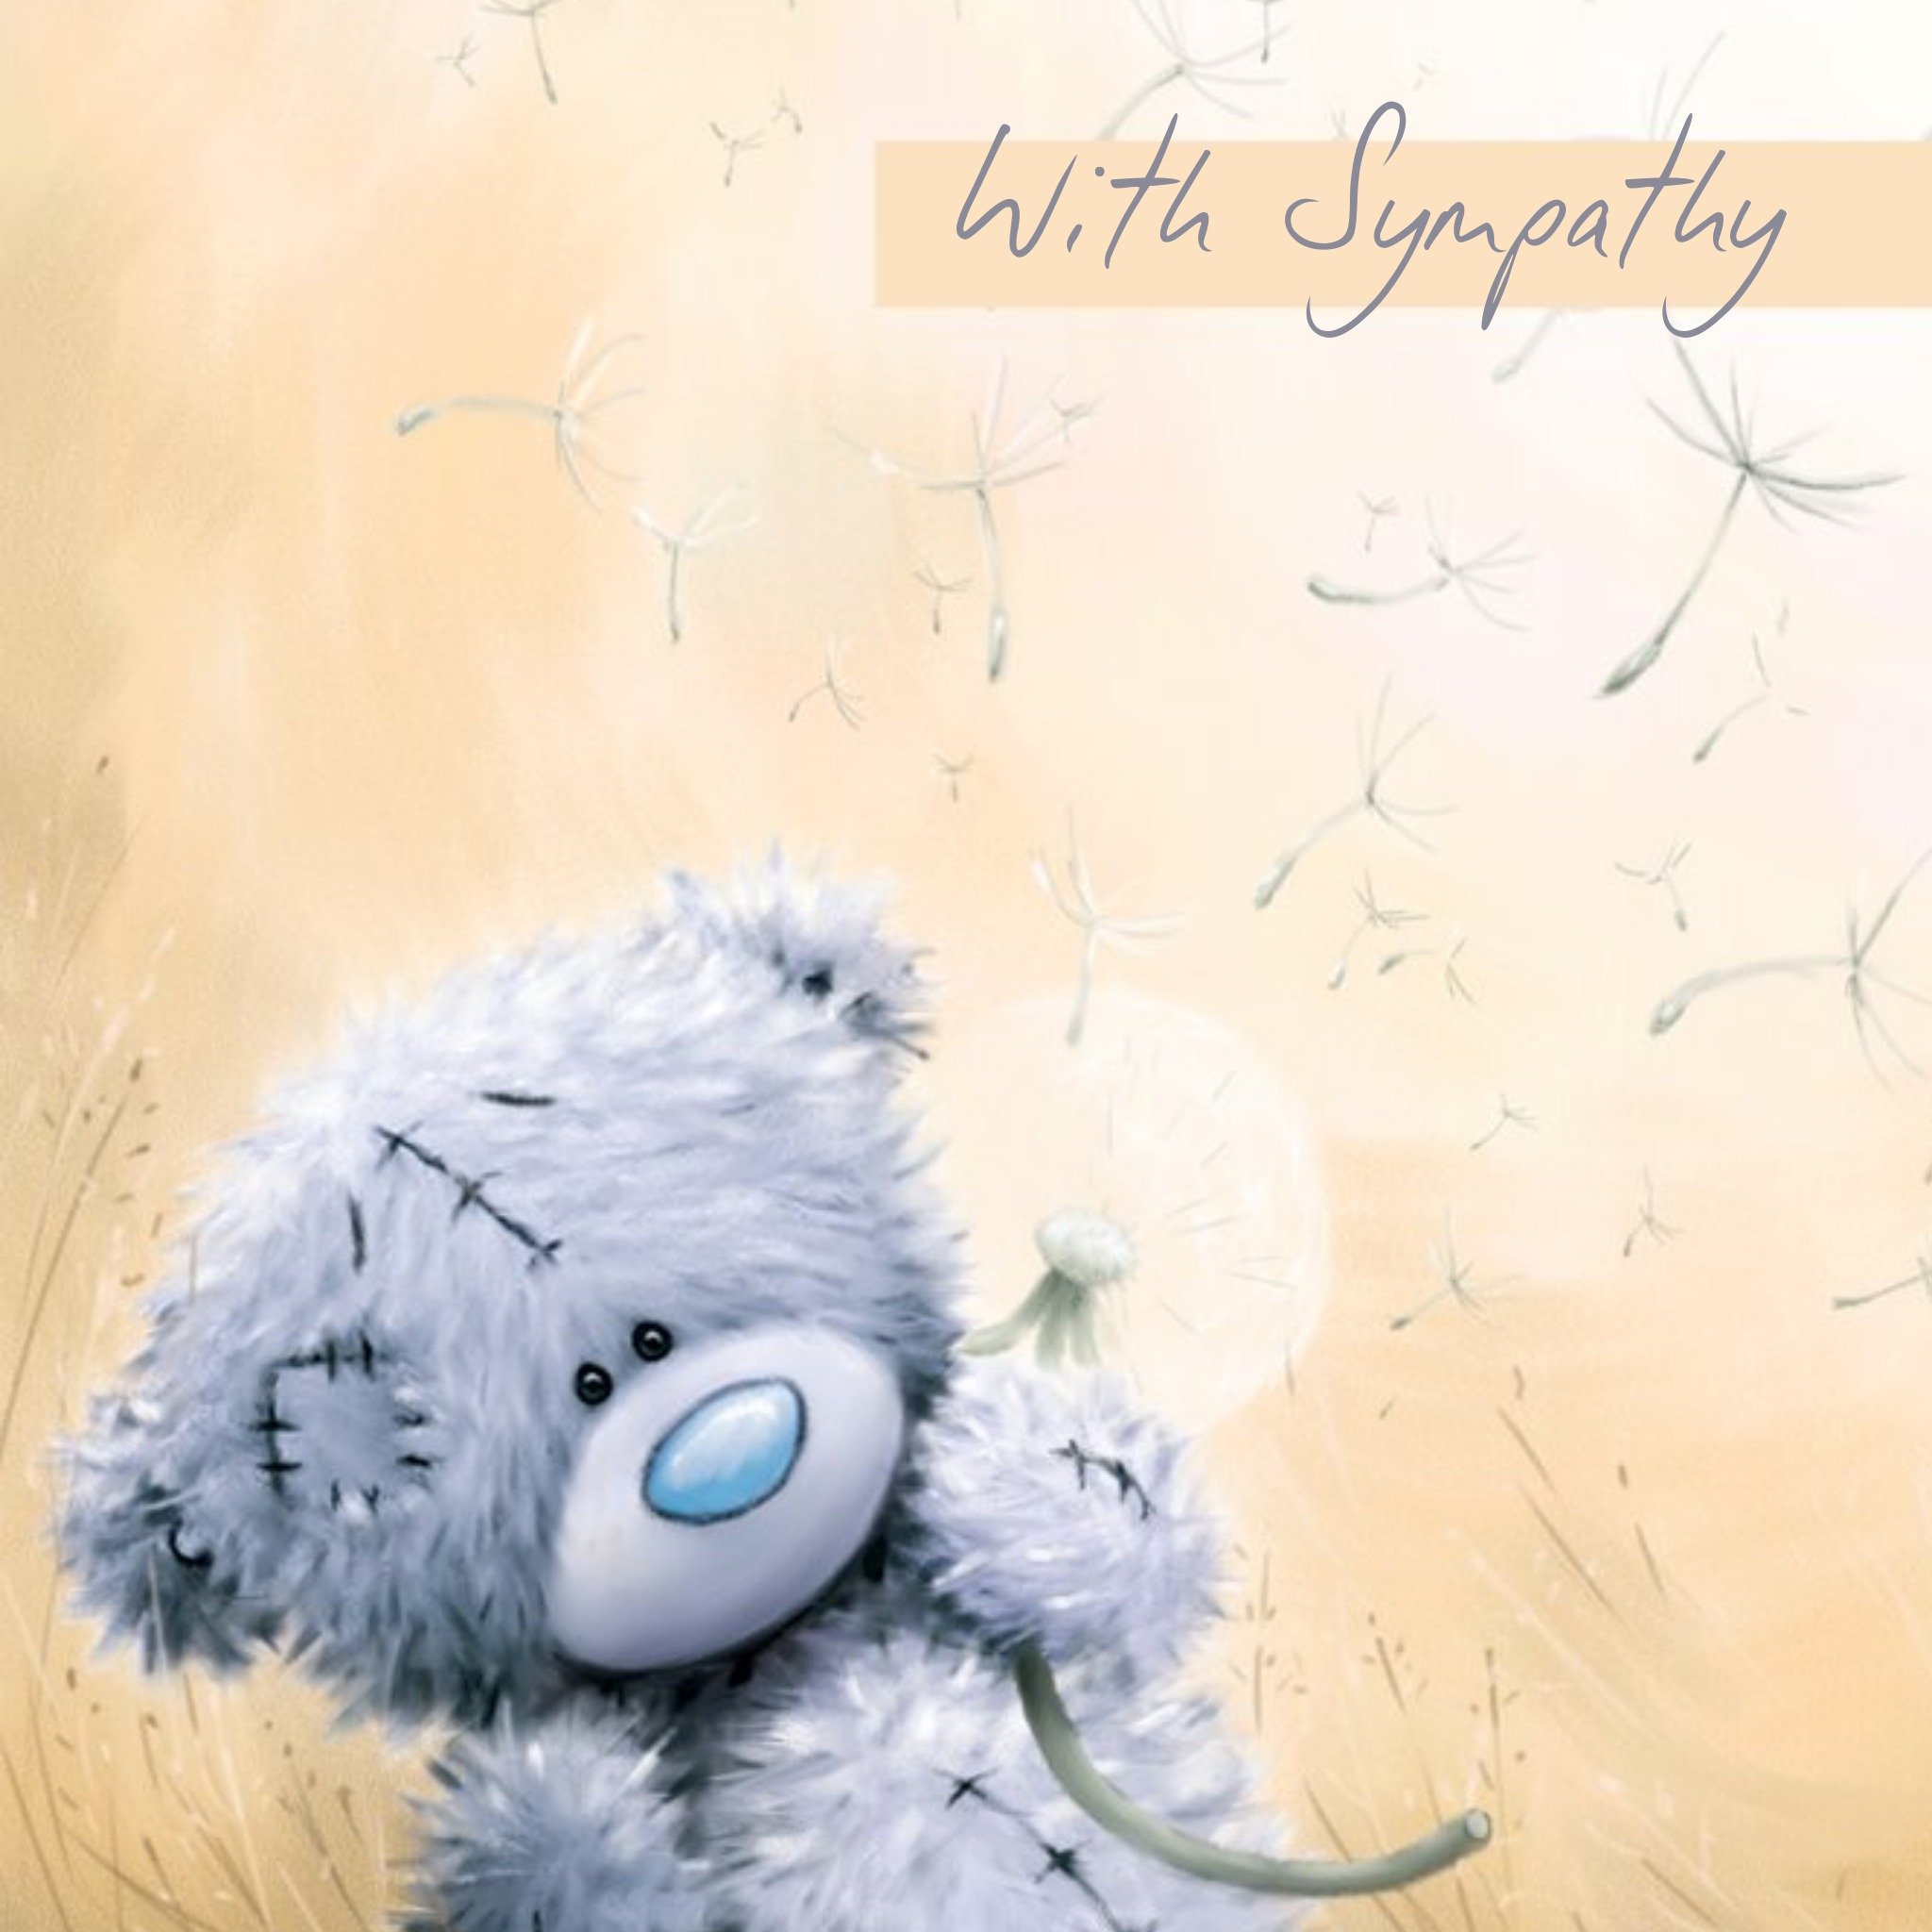 Me To You Tatty Teddy With Sympathy Card, Large